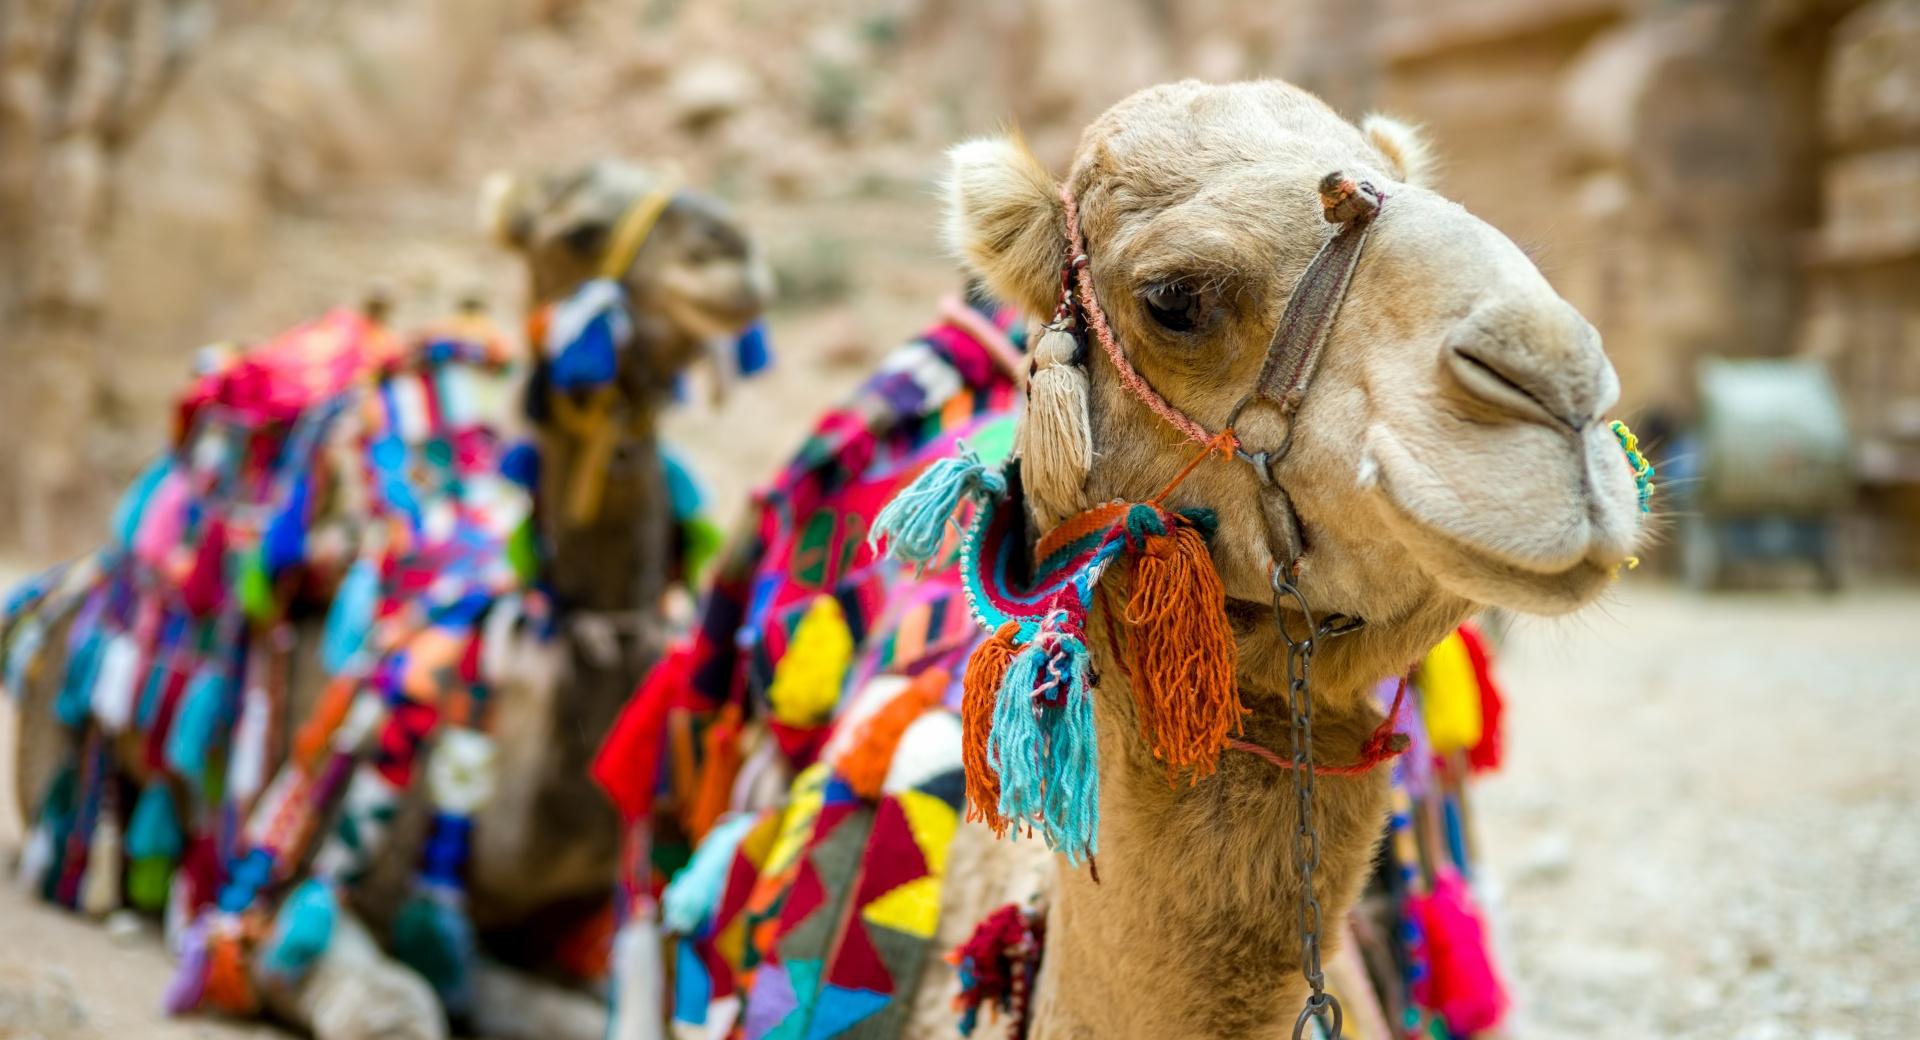 Camel Close-Up wallpapers HD quality